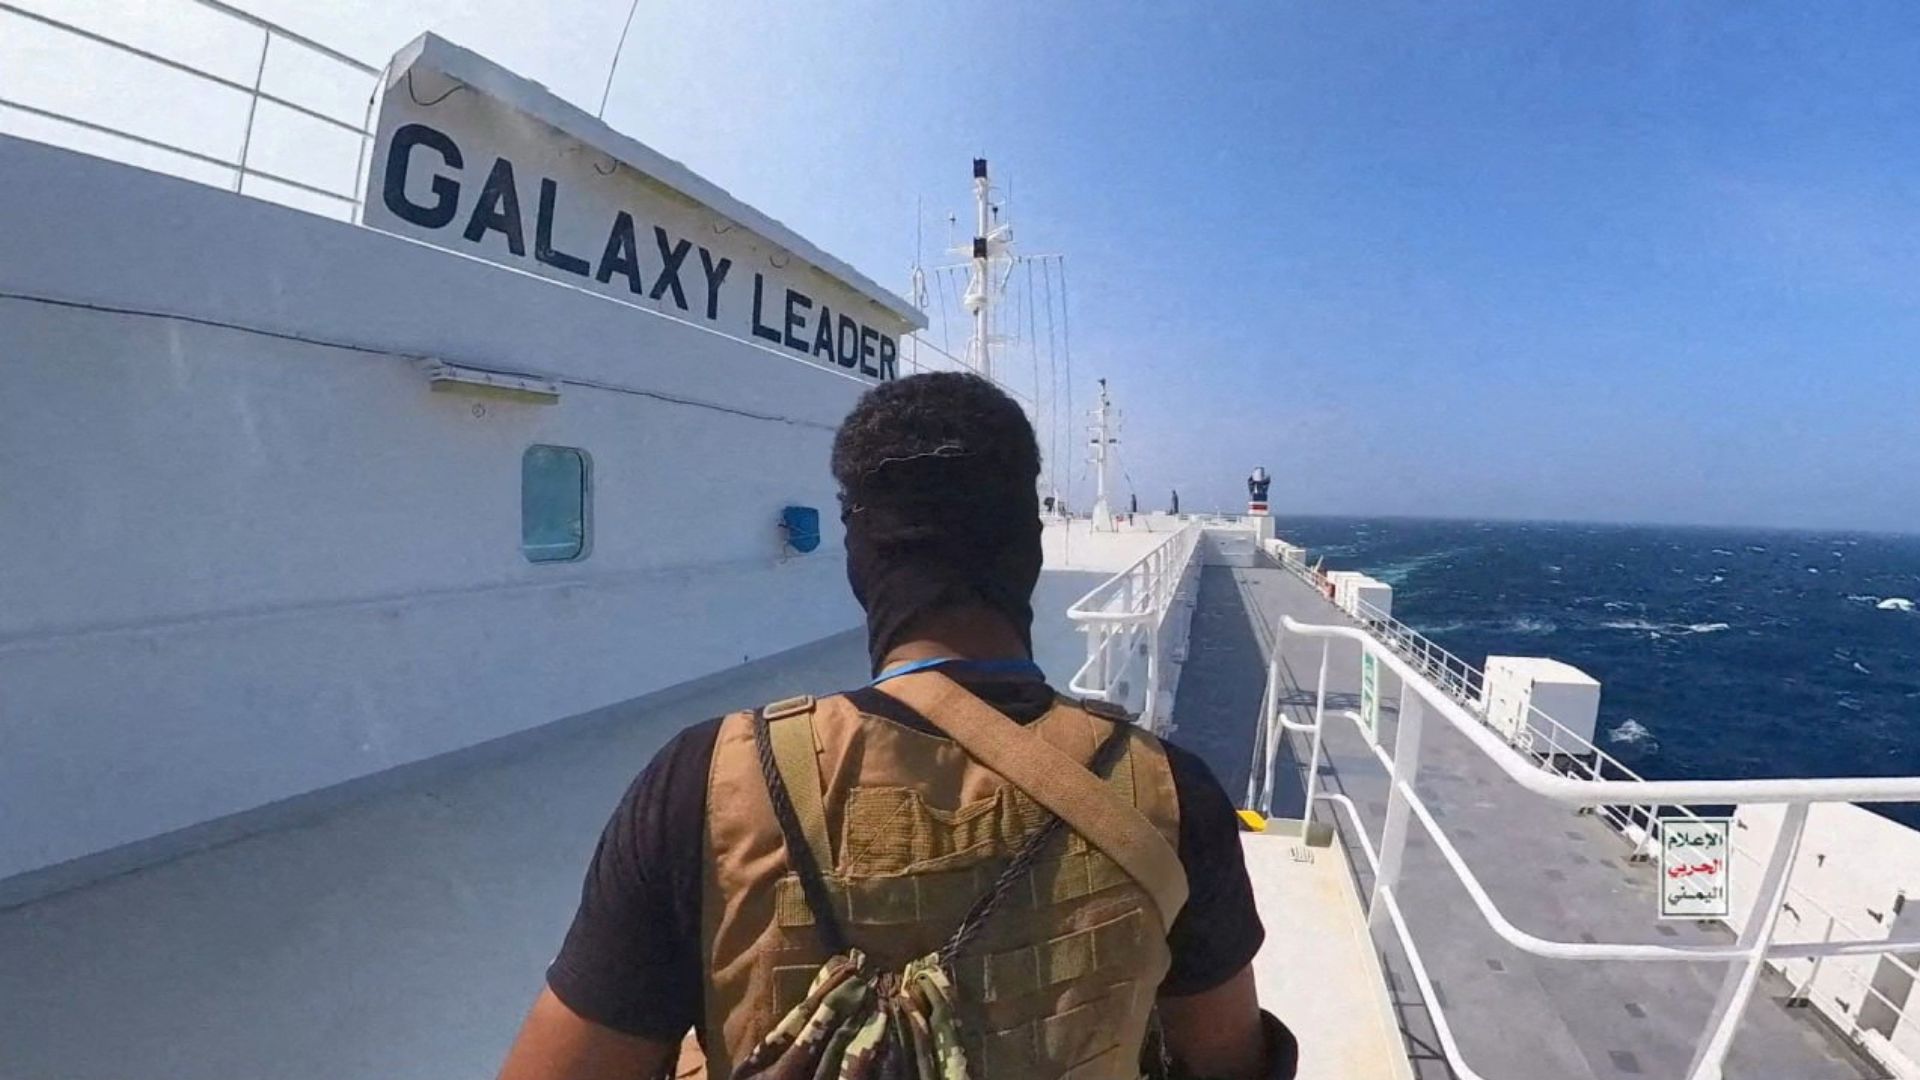 A Houthi fighter stands on the Galaxy Leader cargo ship in the Red Sea. /Handout via Reuters